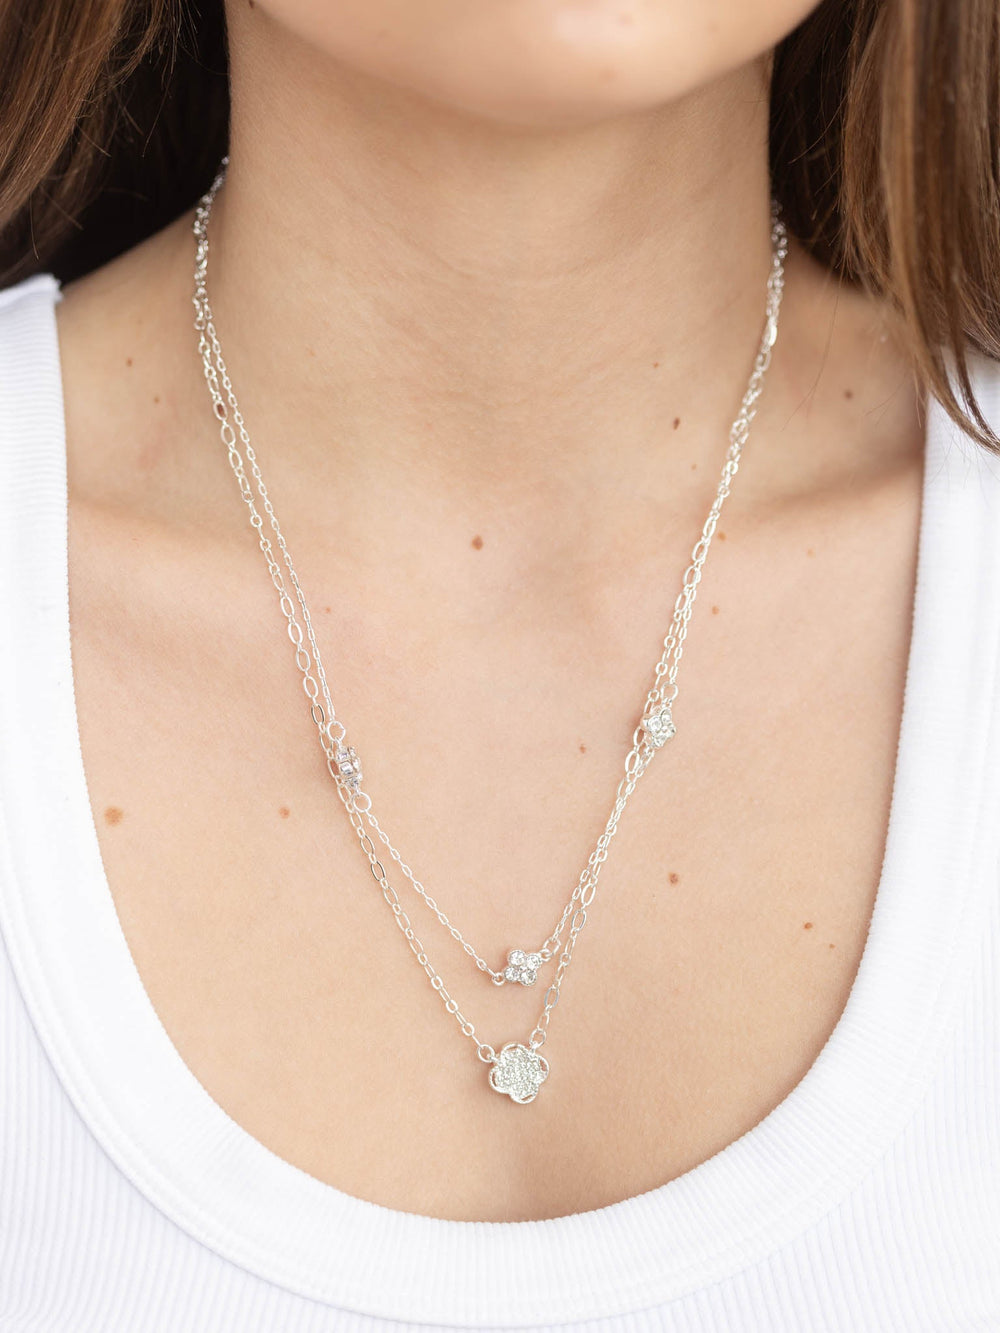 Pave Clover Charms Layered Chain NecklaceNecklace